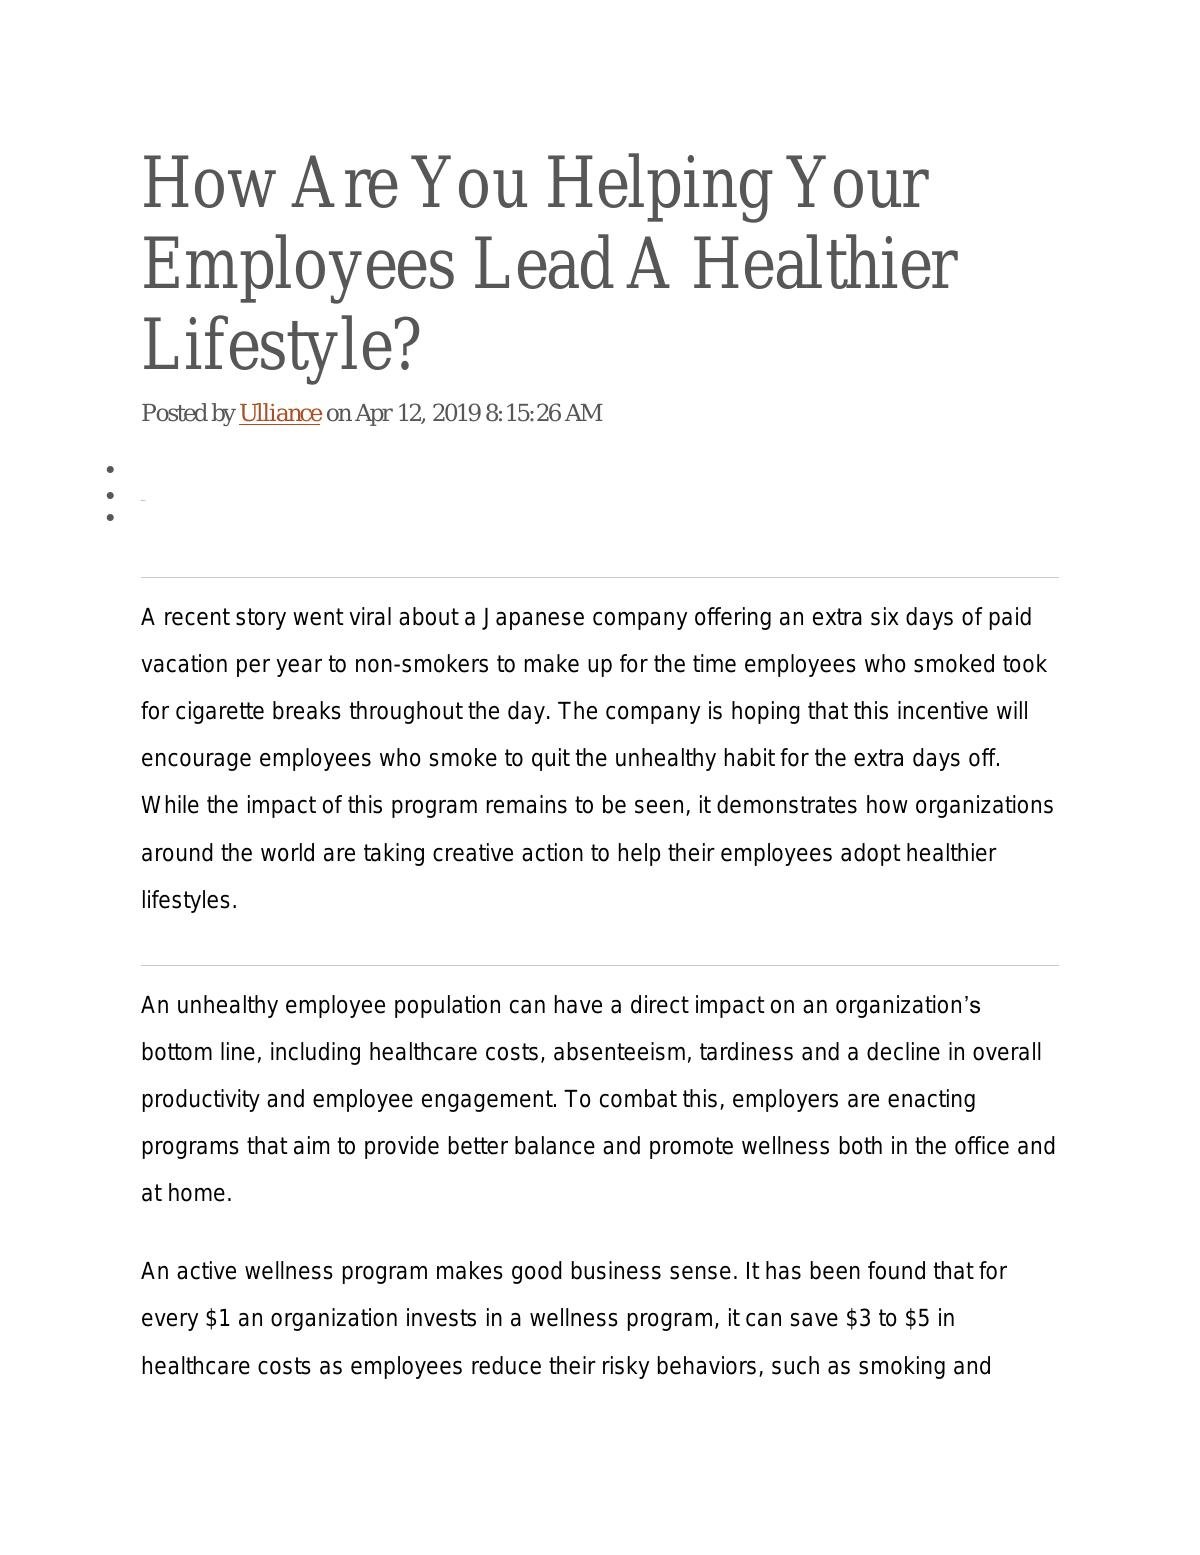 How Are Your Helping Your Employees Lead a Healthier Lifestyle?